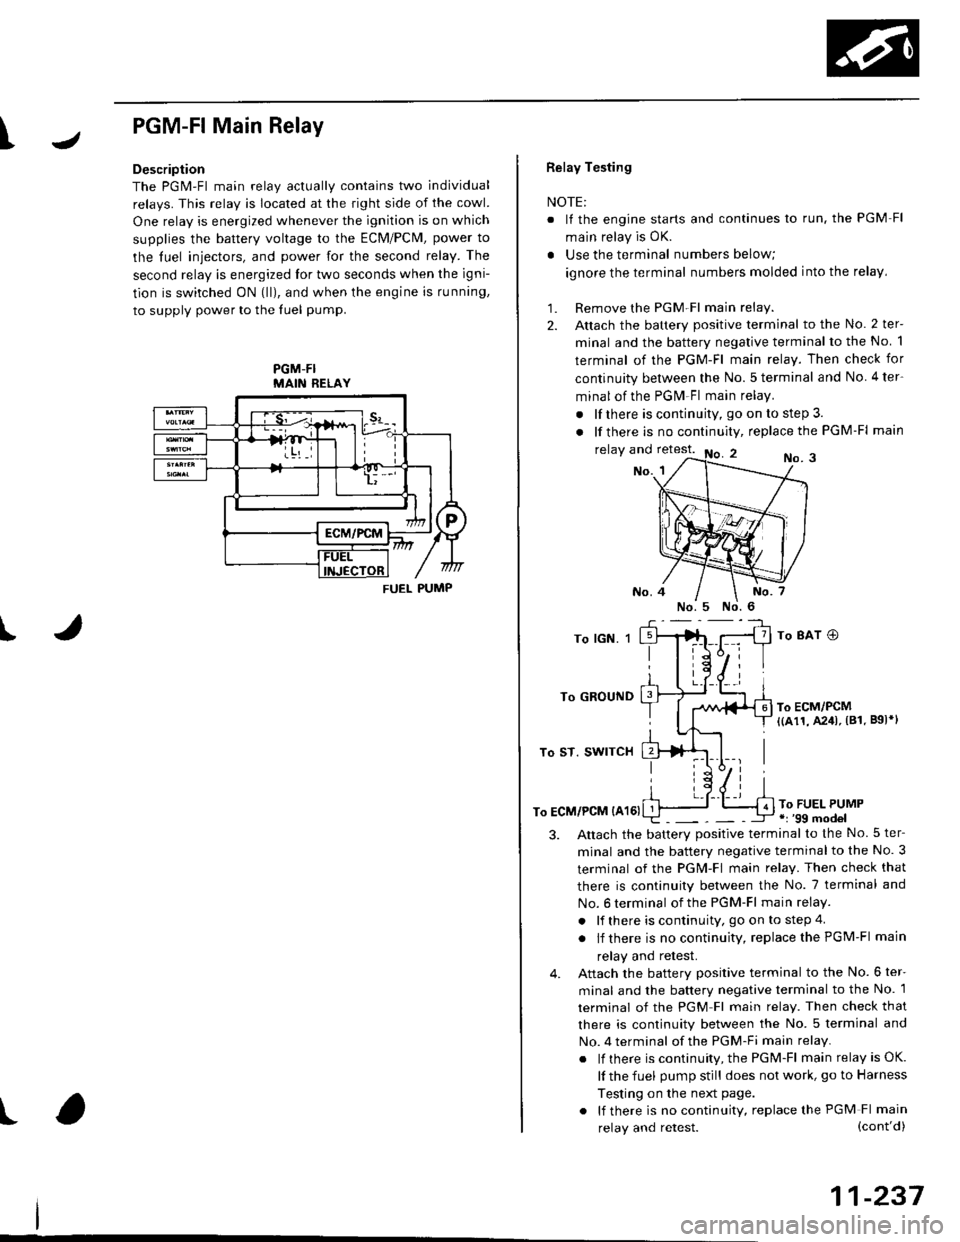 HONDA CIVIC 1998 6.G Service Manual I
PGM-FlMain Relay
Description
The PGM-Fl main relav actuallv contains two individual
relays. This relay is located at the right side of the cowl.
One relay is energized whenever the ignition is on wh